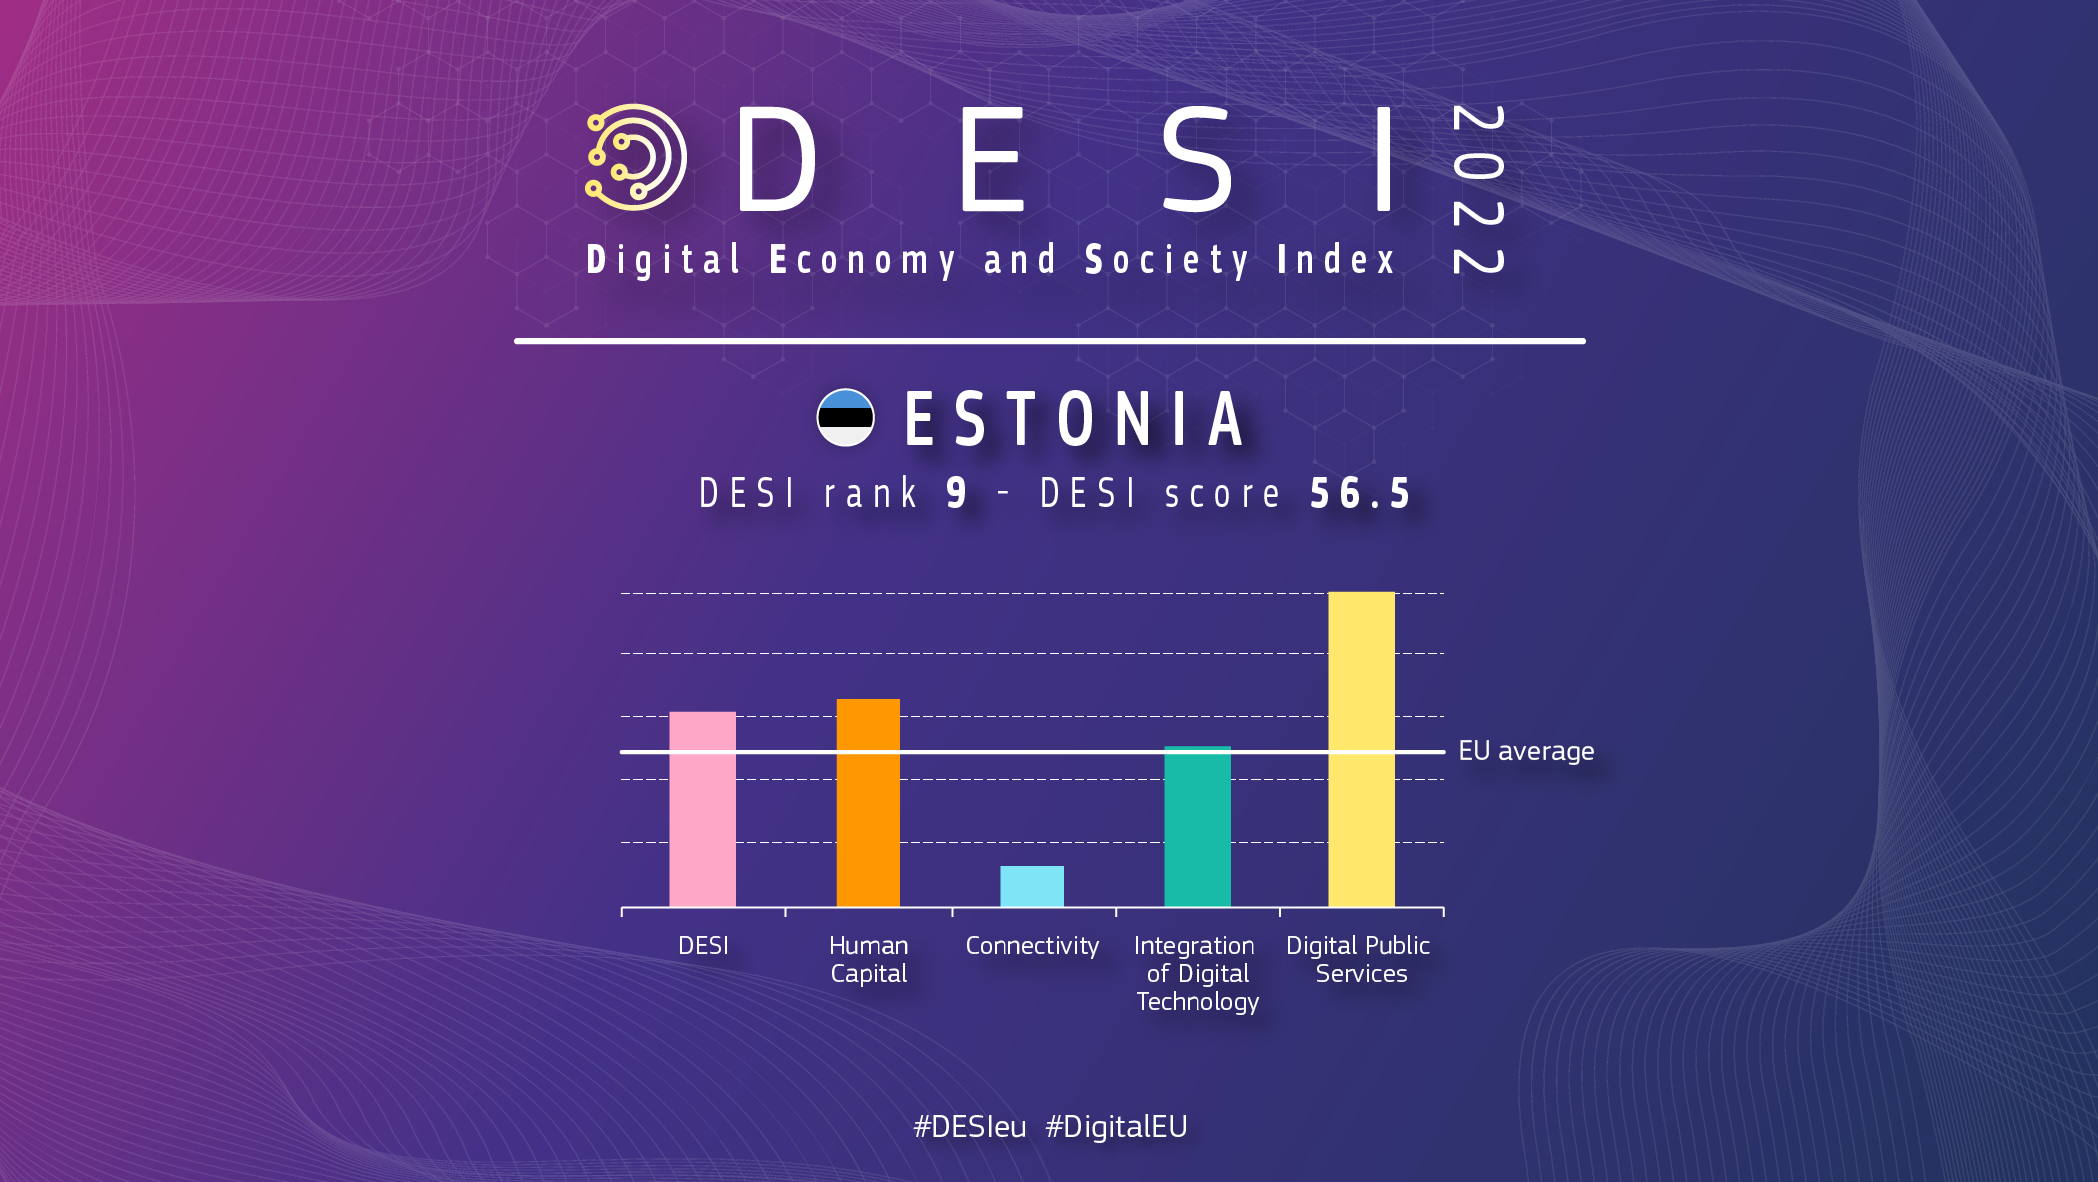 Graphic overview of Estonia in DESI showing a ranking of 9 and a score of 56.5